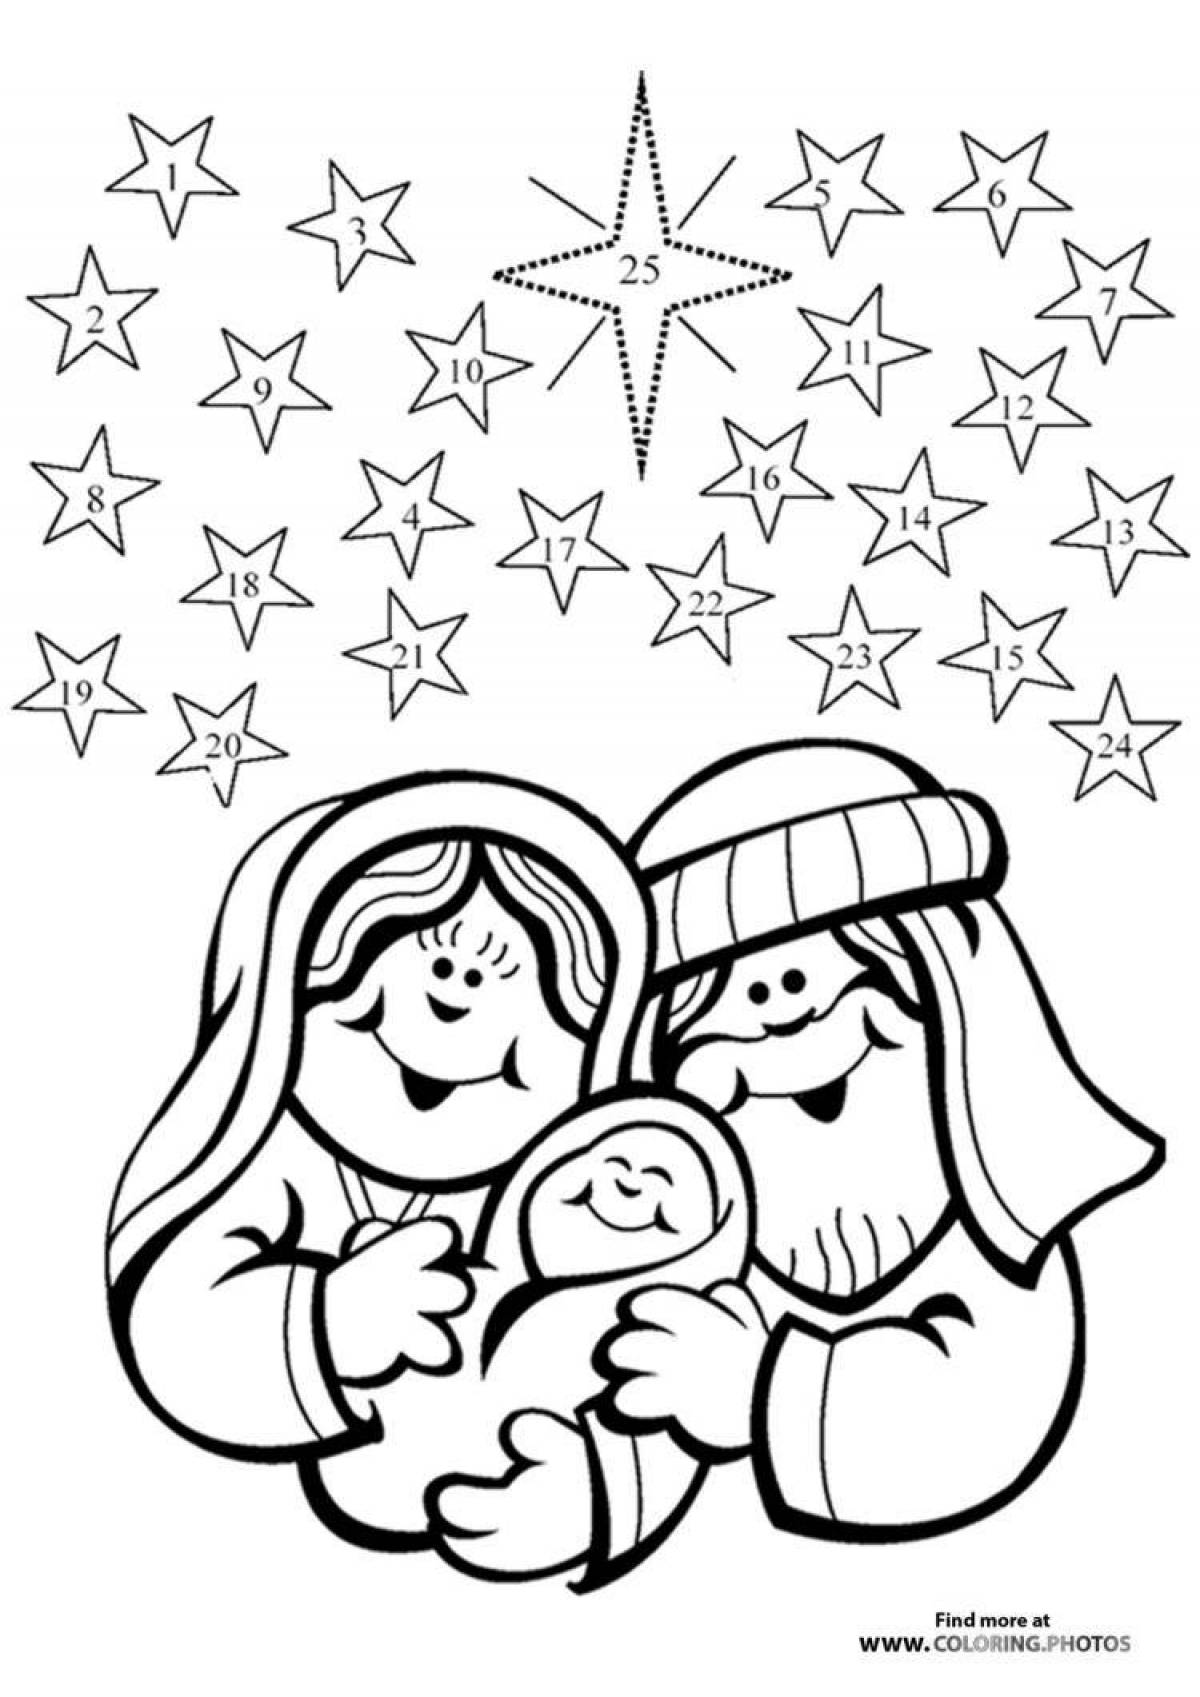 Gorgeous Christmas star coloring book for kids